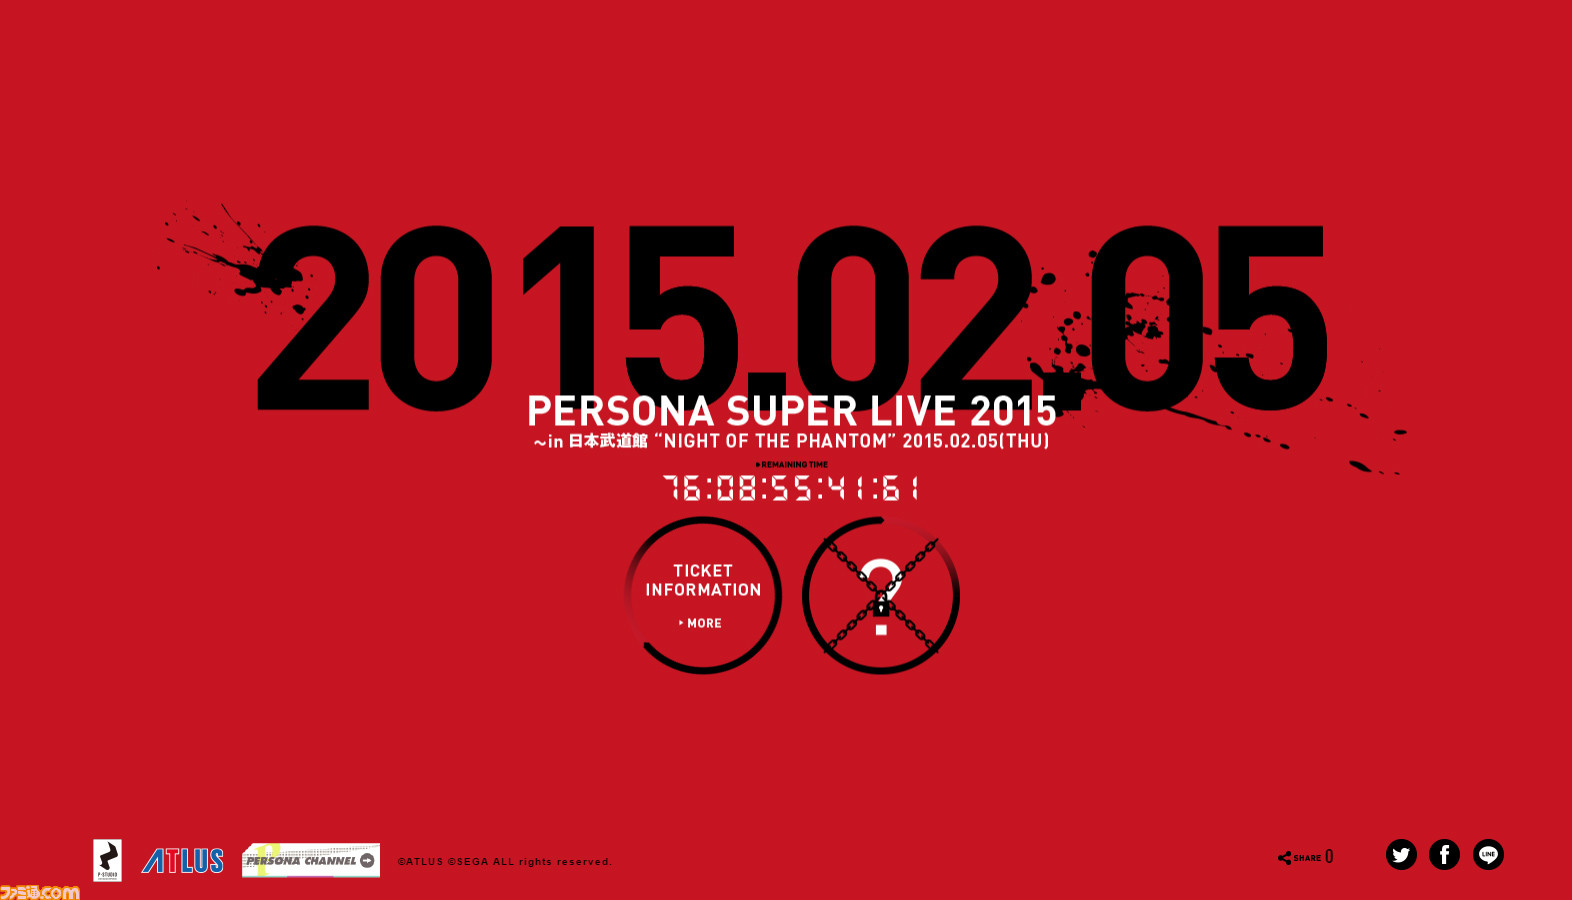 PERSONA SUPER LIVE 2015 ～in 日本武道館 -NIGHT OF THE PHANTOM-”の開催が決定！  チケット抽選受付も開始